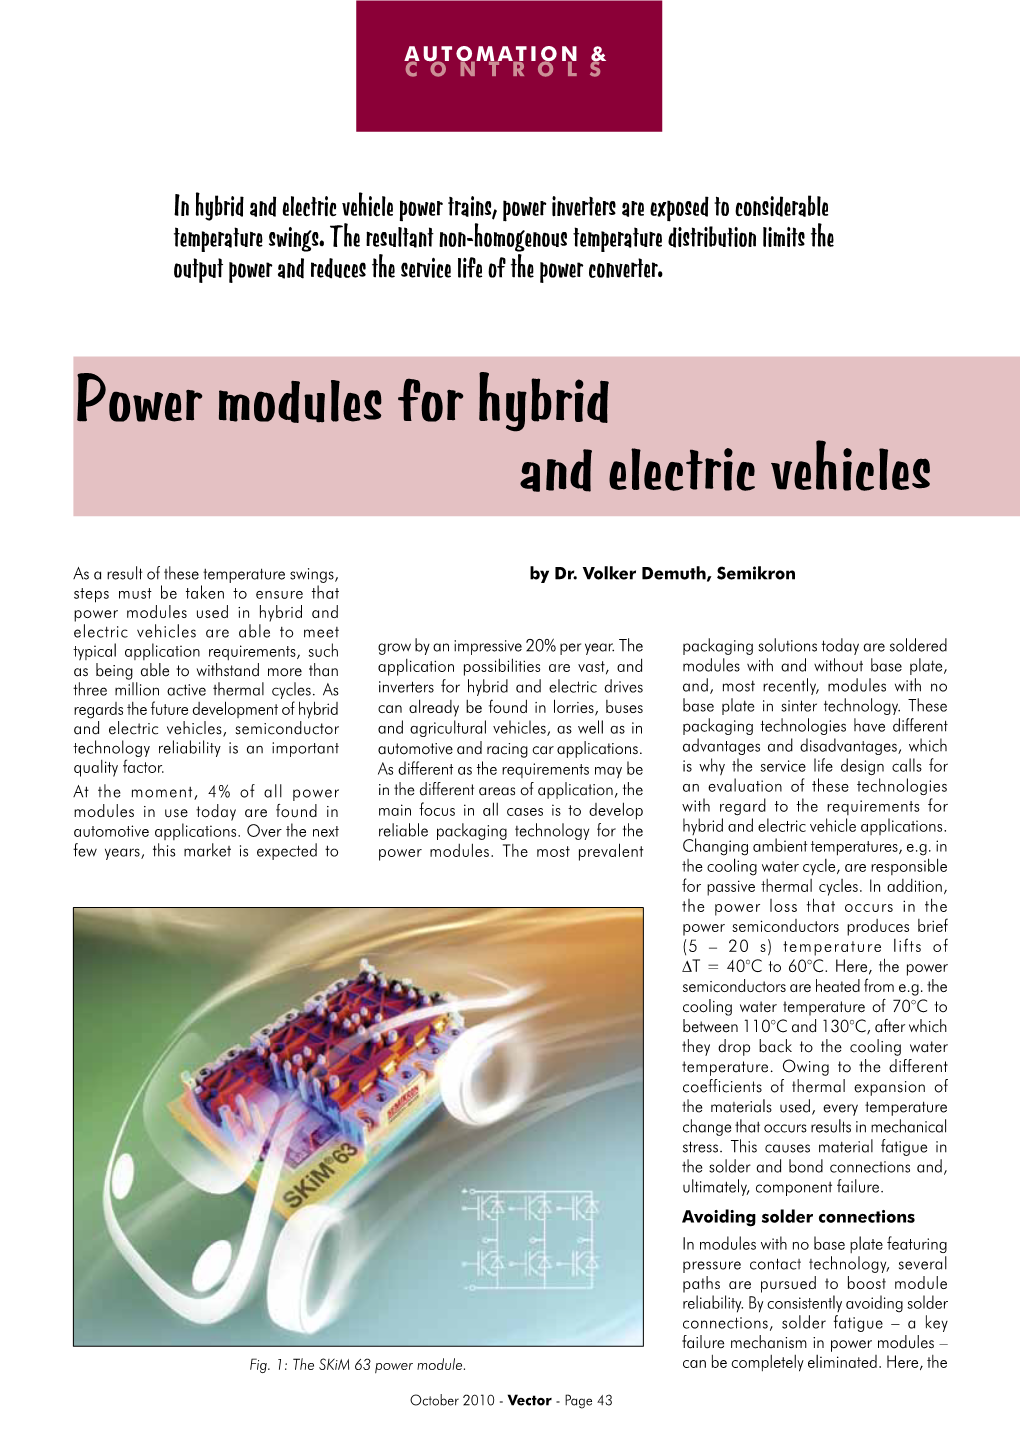 Power Modules for Hybrid and Electric Vehicles